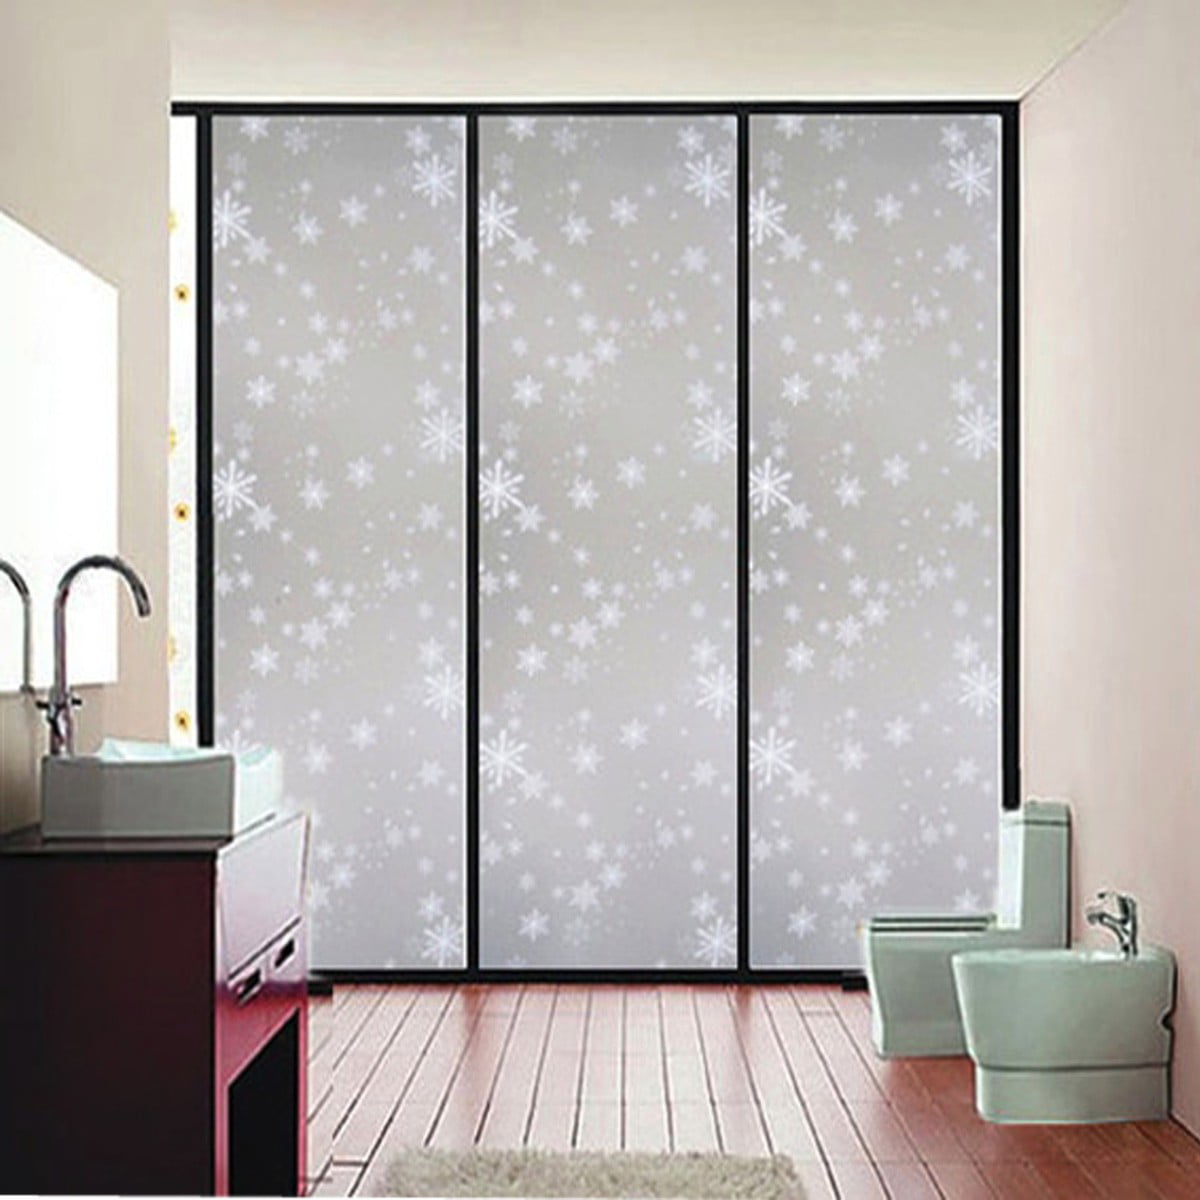 3' Static Cling Frosted Film Sticker Window Glass Home Bathroom Security Privacy 